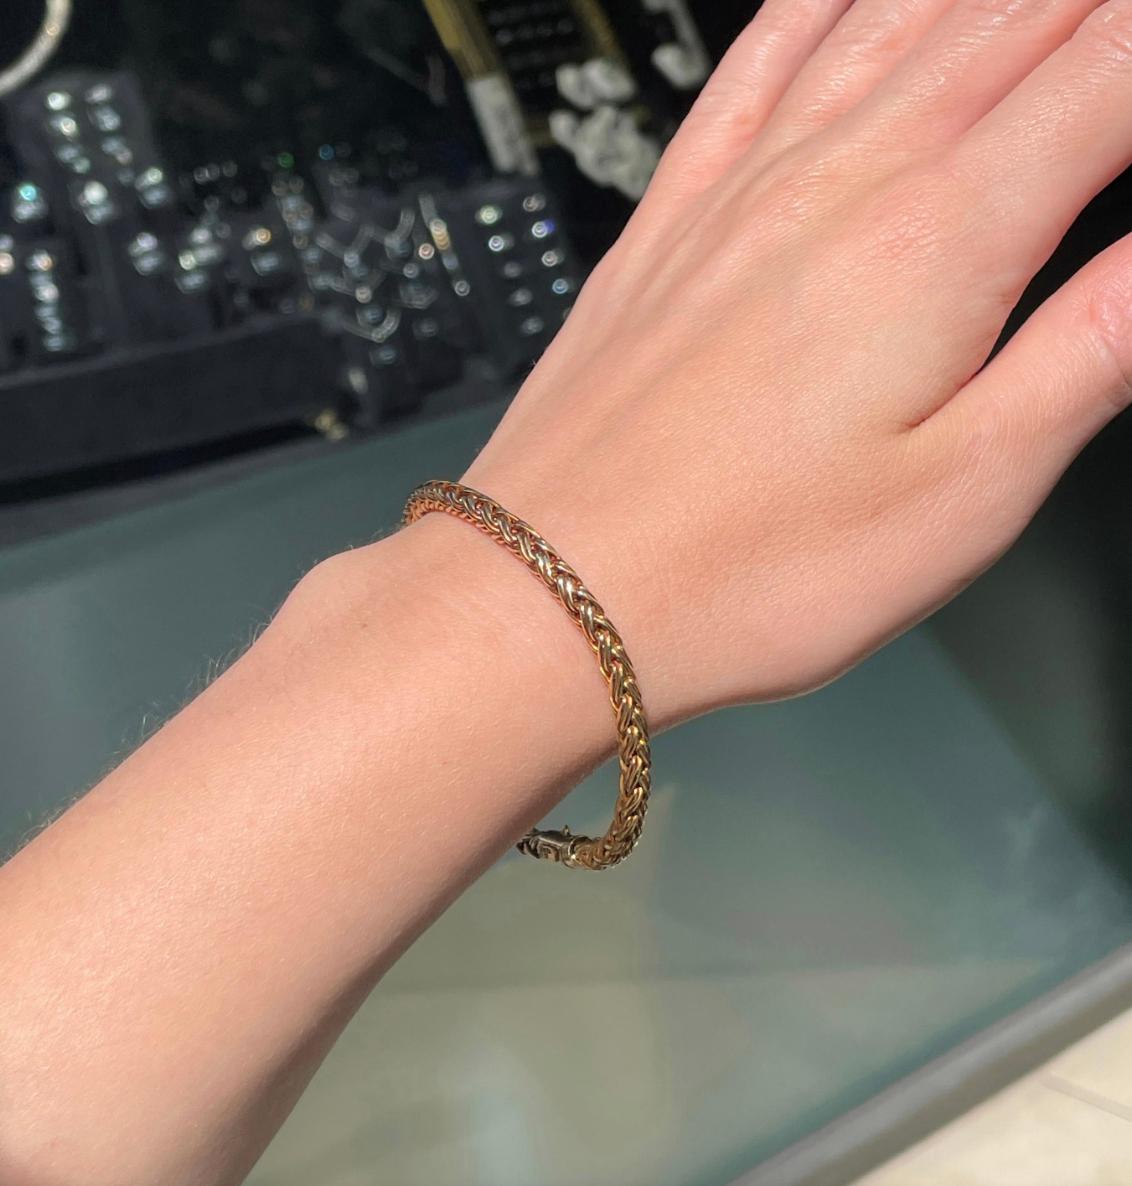 This classic bracelet by Tiffany & Co. showcases a braided round wheat chain design masterfully crafted from 18 carat yellow gold. This piece screams vintage Tiffany, and would look divine with both casual and formalwear. 

The fantastic piece is